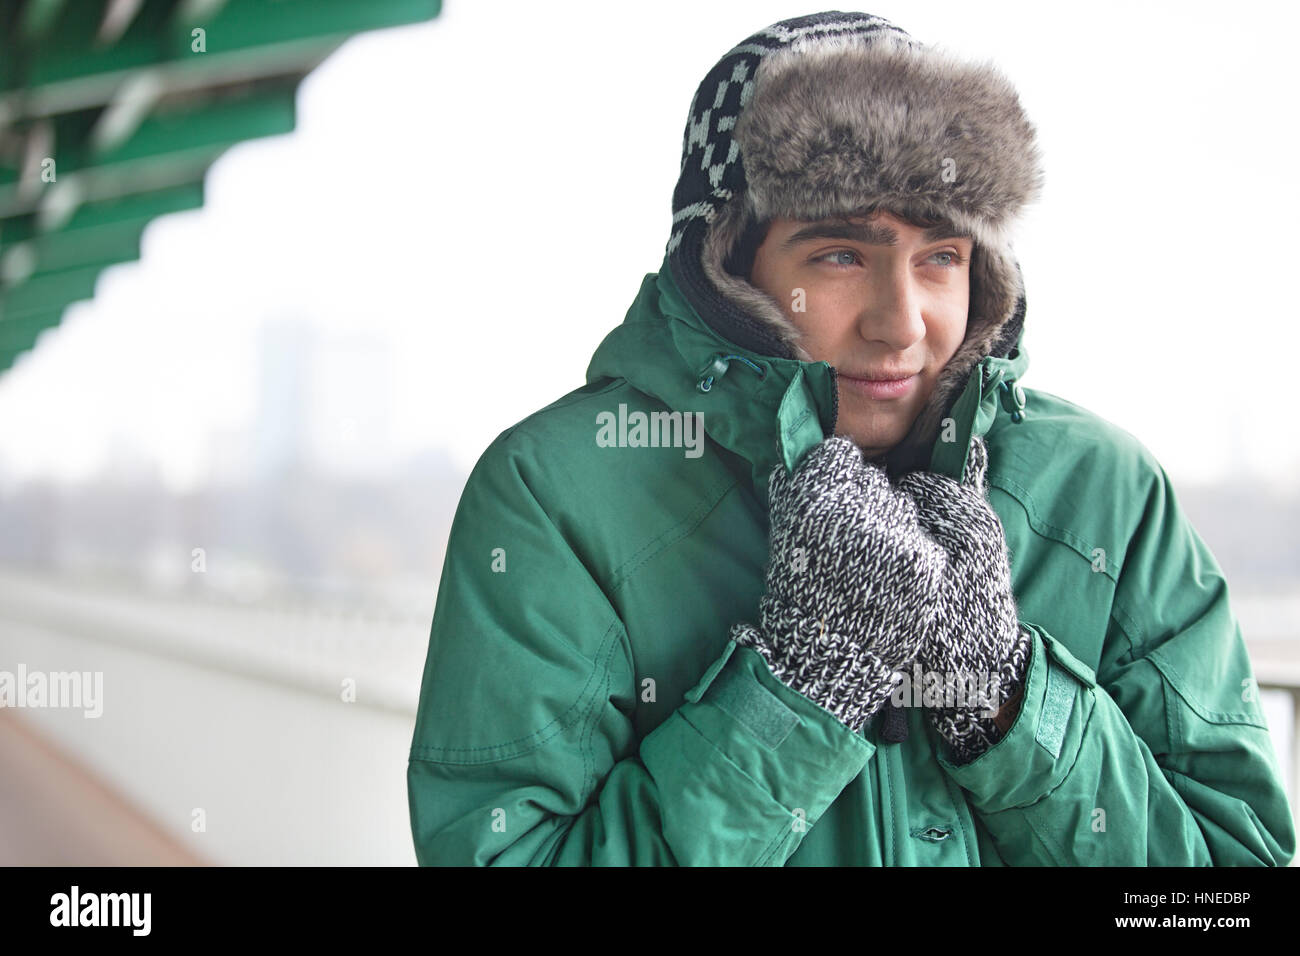 Man in warm clothing shivering outdoors Stock Photo